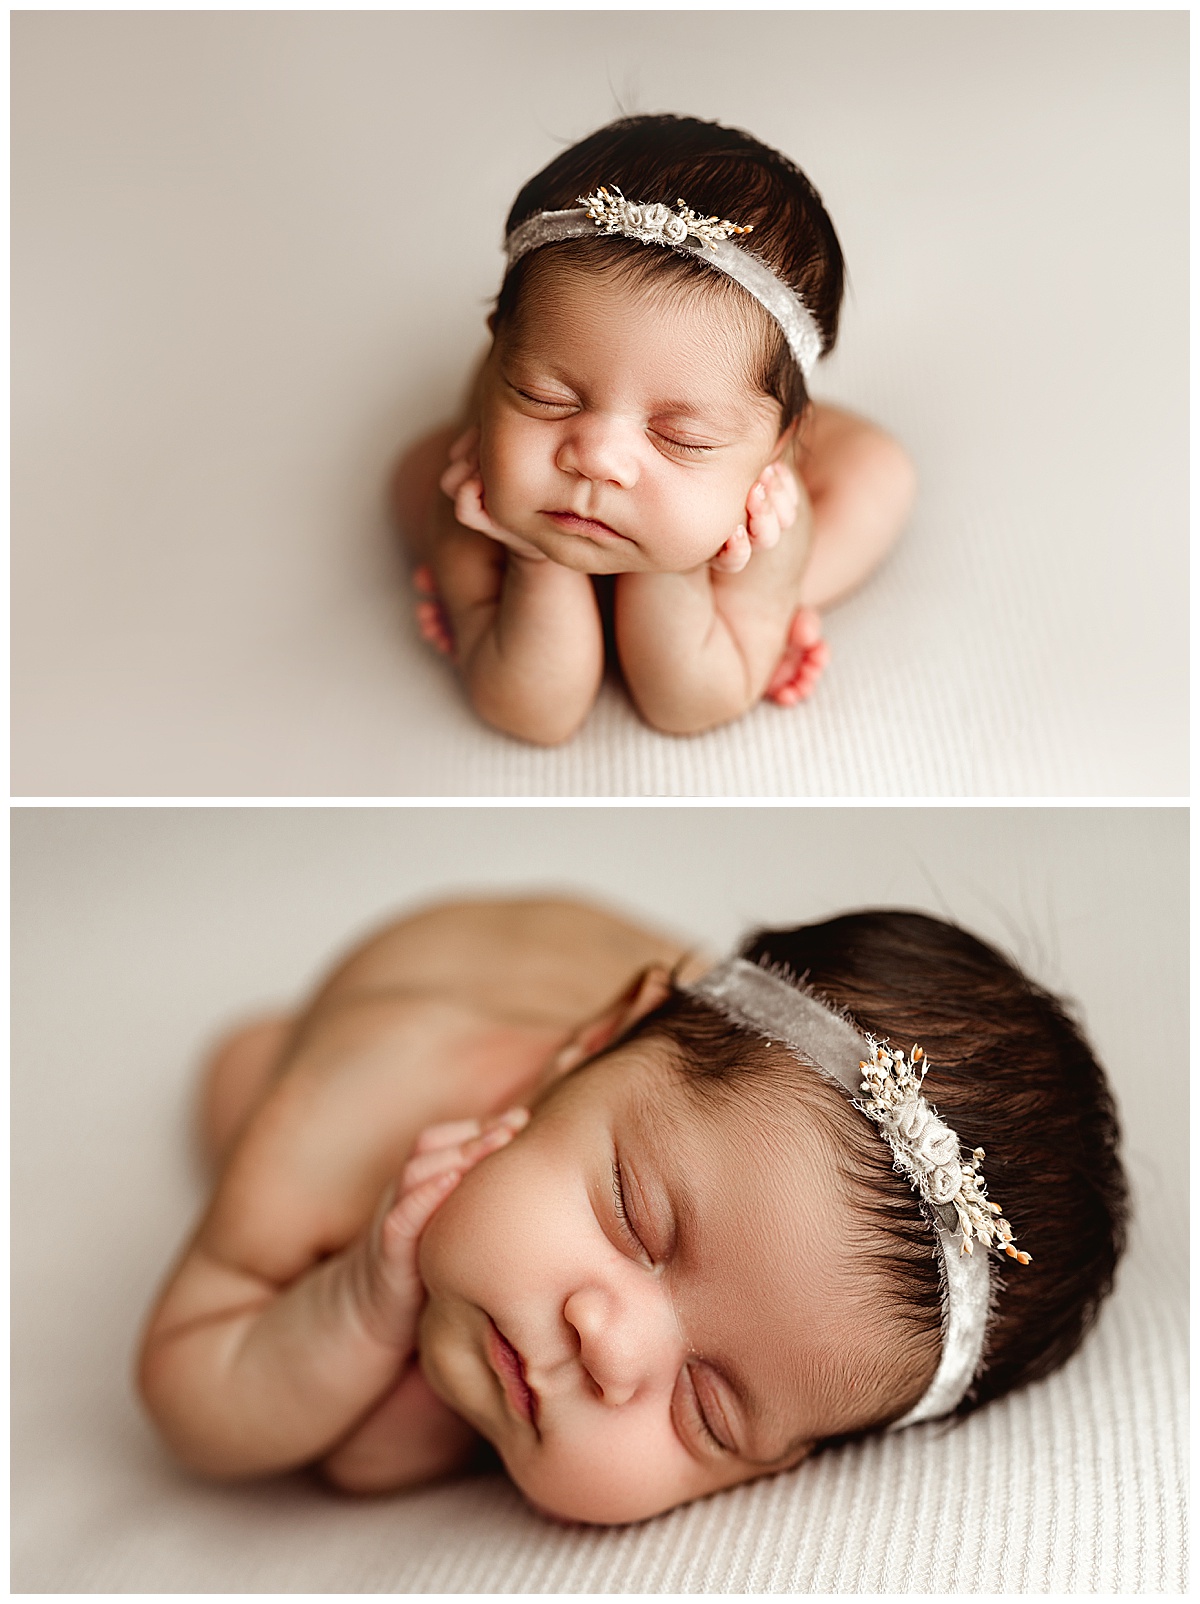 Newborn baby resting on their hands for Norma Fayak Photography